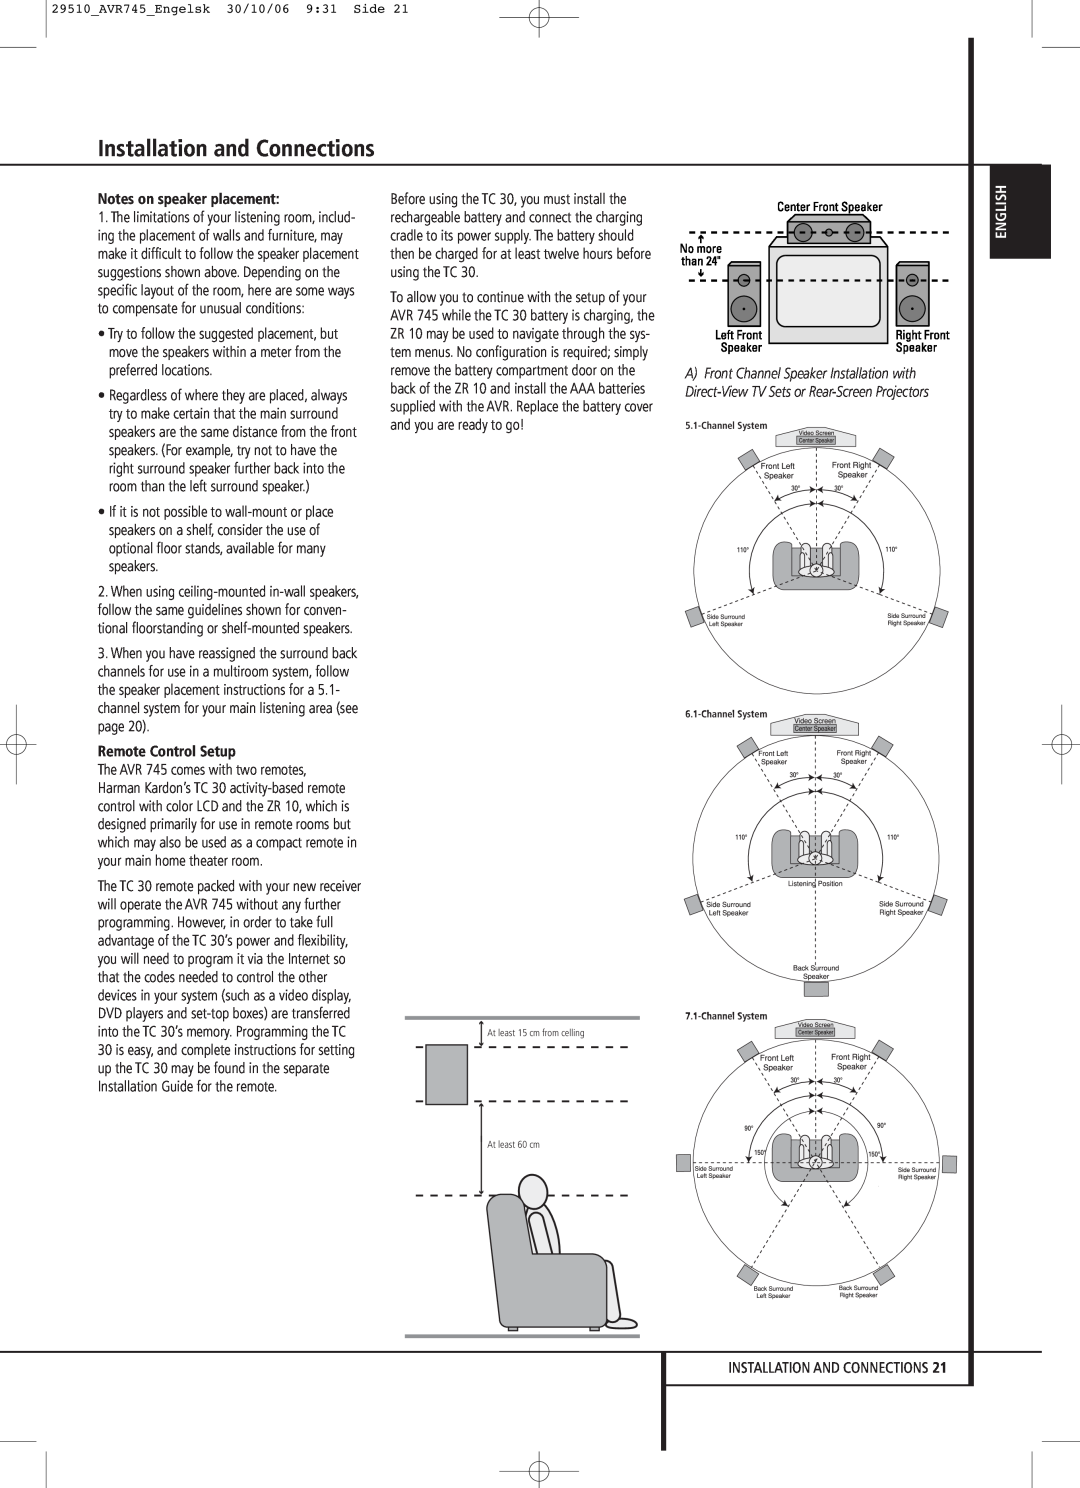 Harman-Kardon AVR 745 owner manual Notes on speaker placement, Remote Control Setup, Installation and Connections, English 